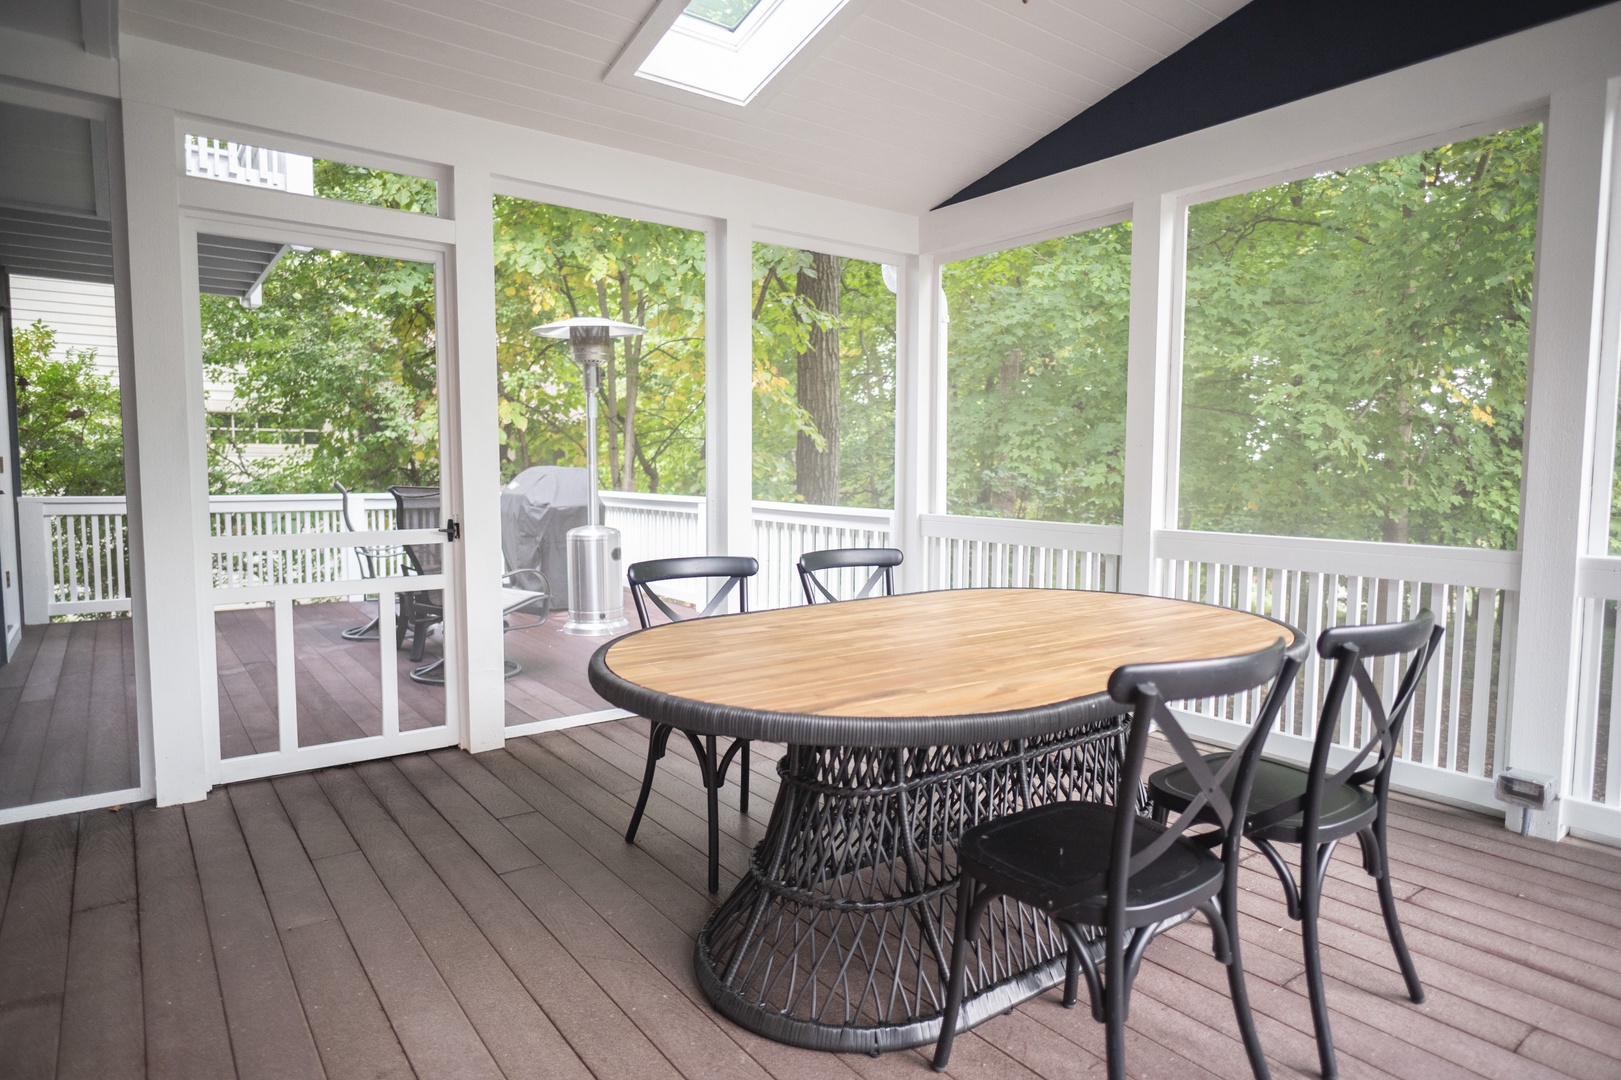 Enjoy a meal on the screened-in porch